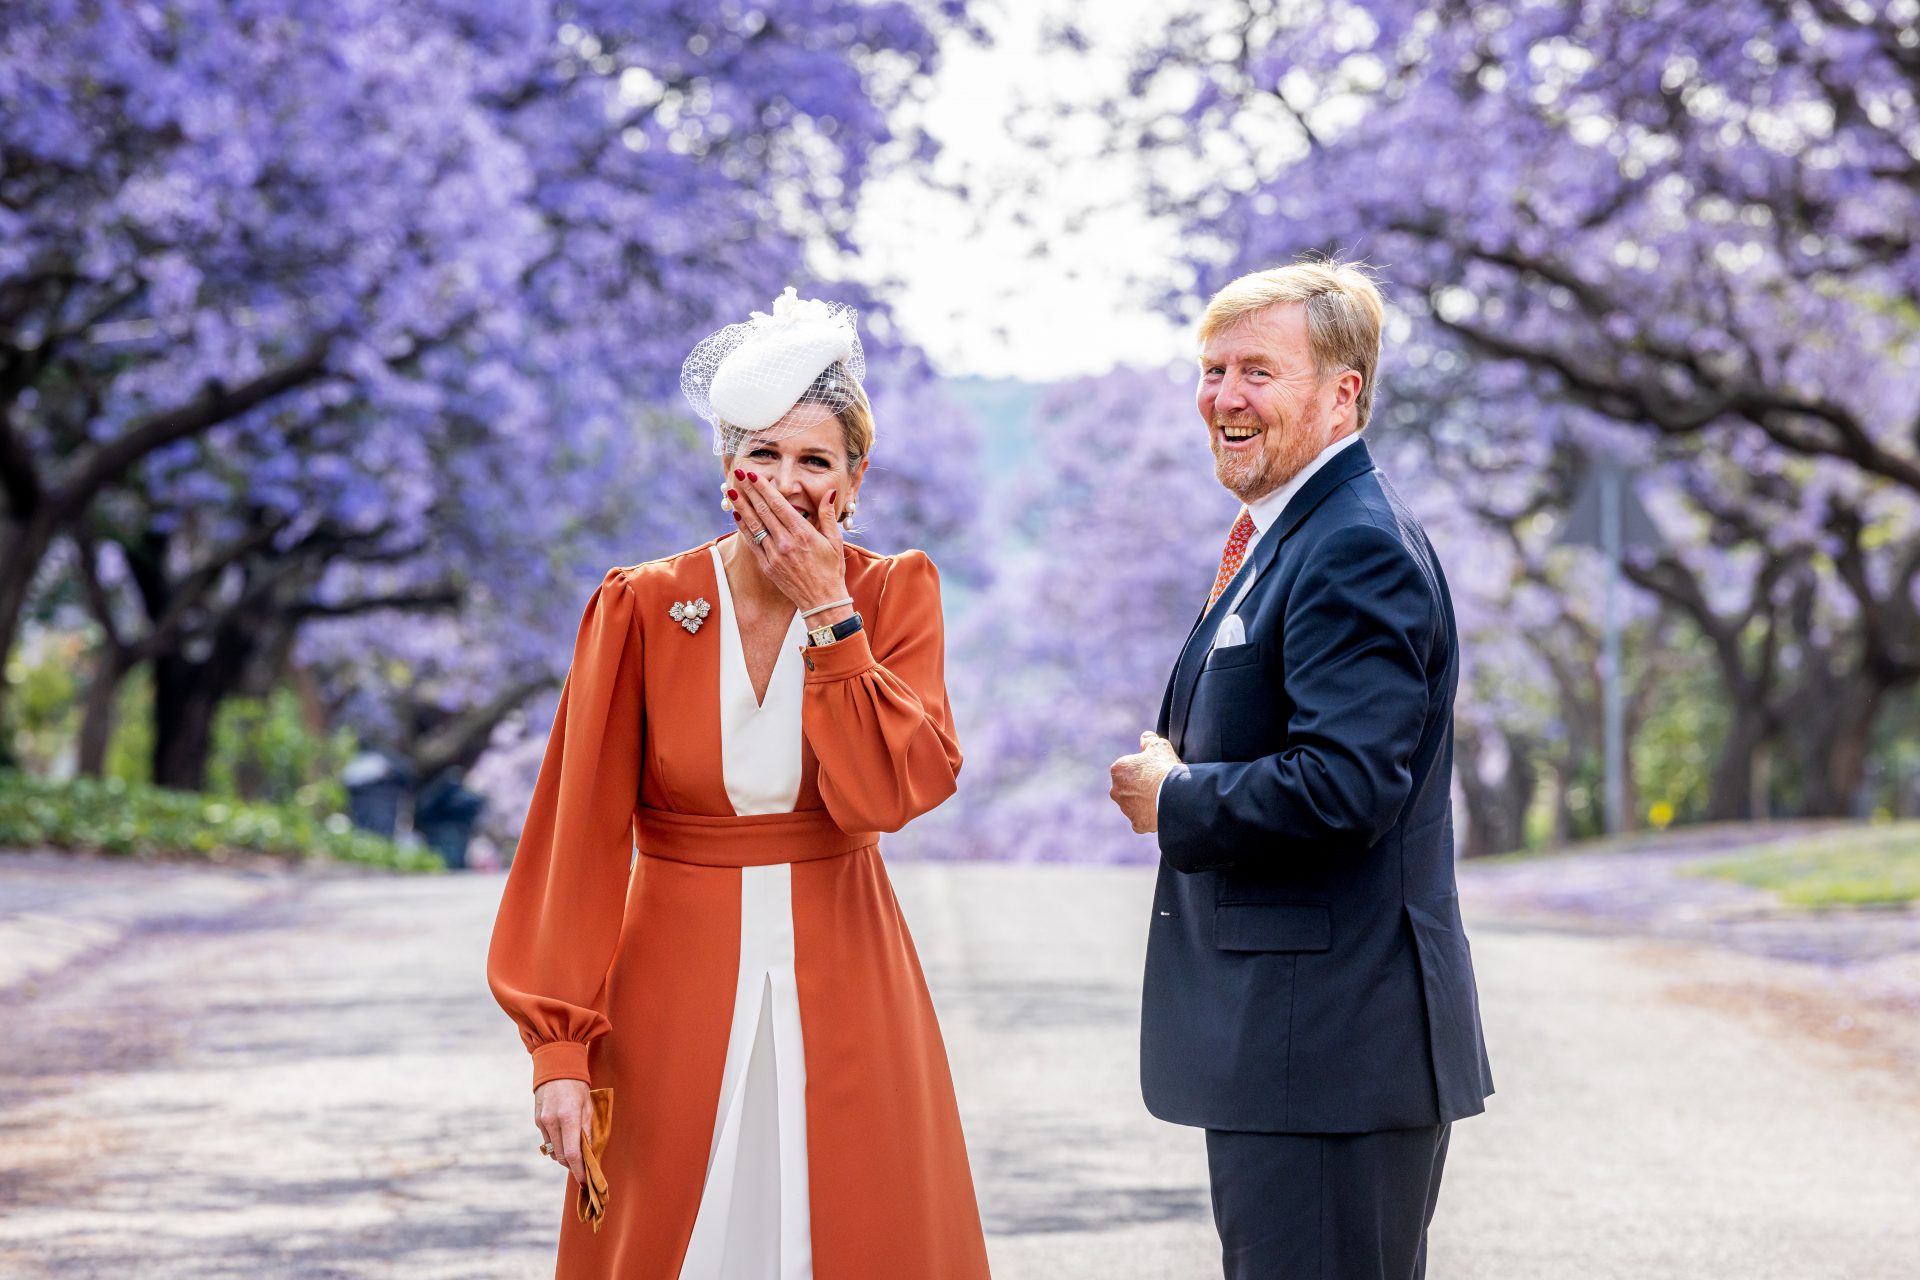 2023 in photos: King Willem-Alexander and Queen Máxima visit South Africa